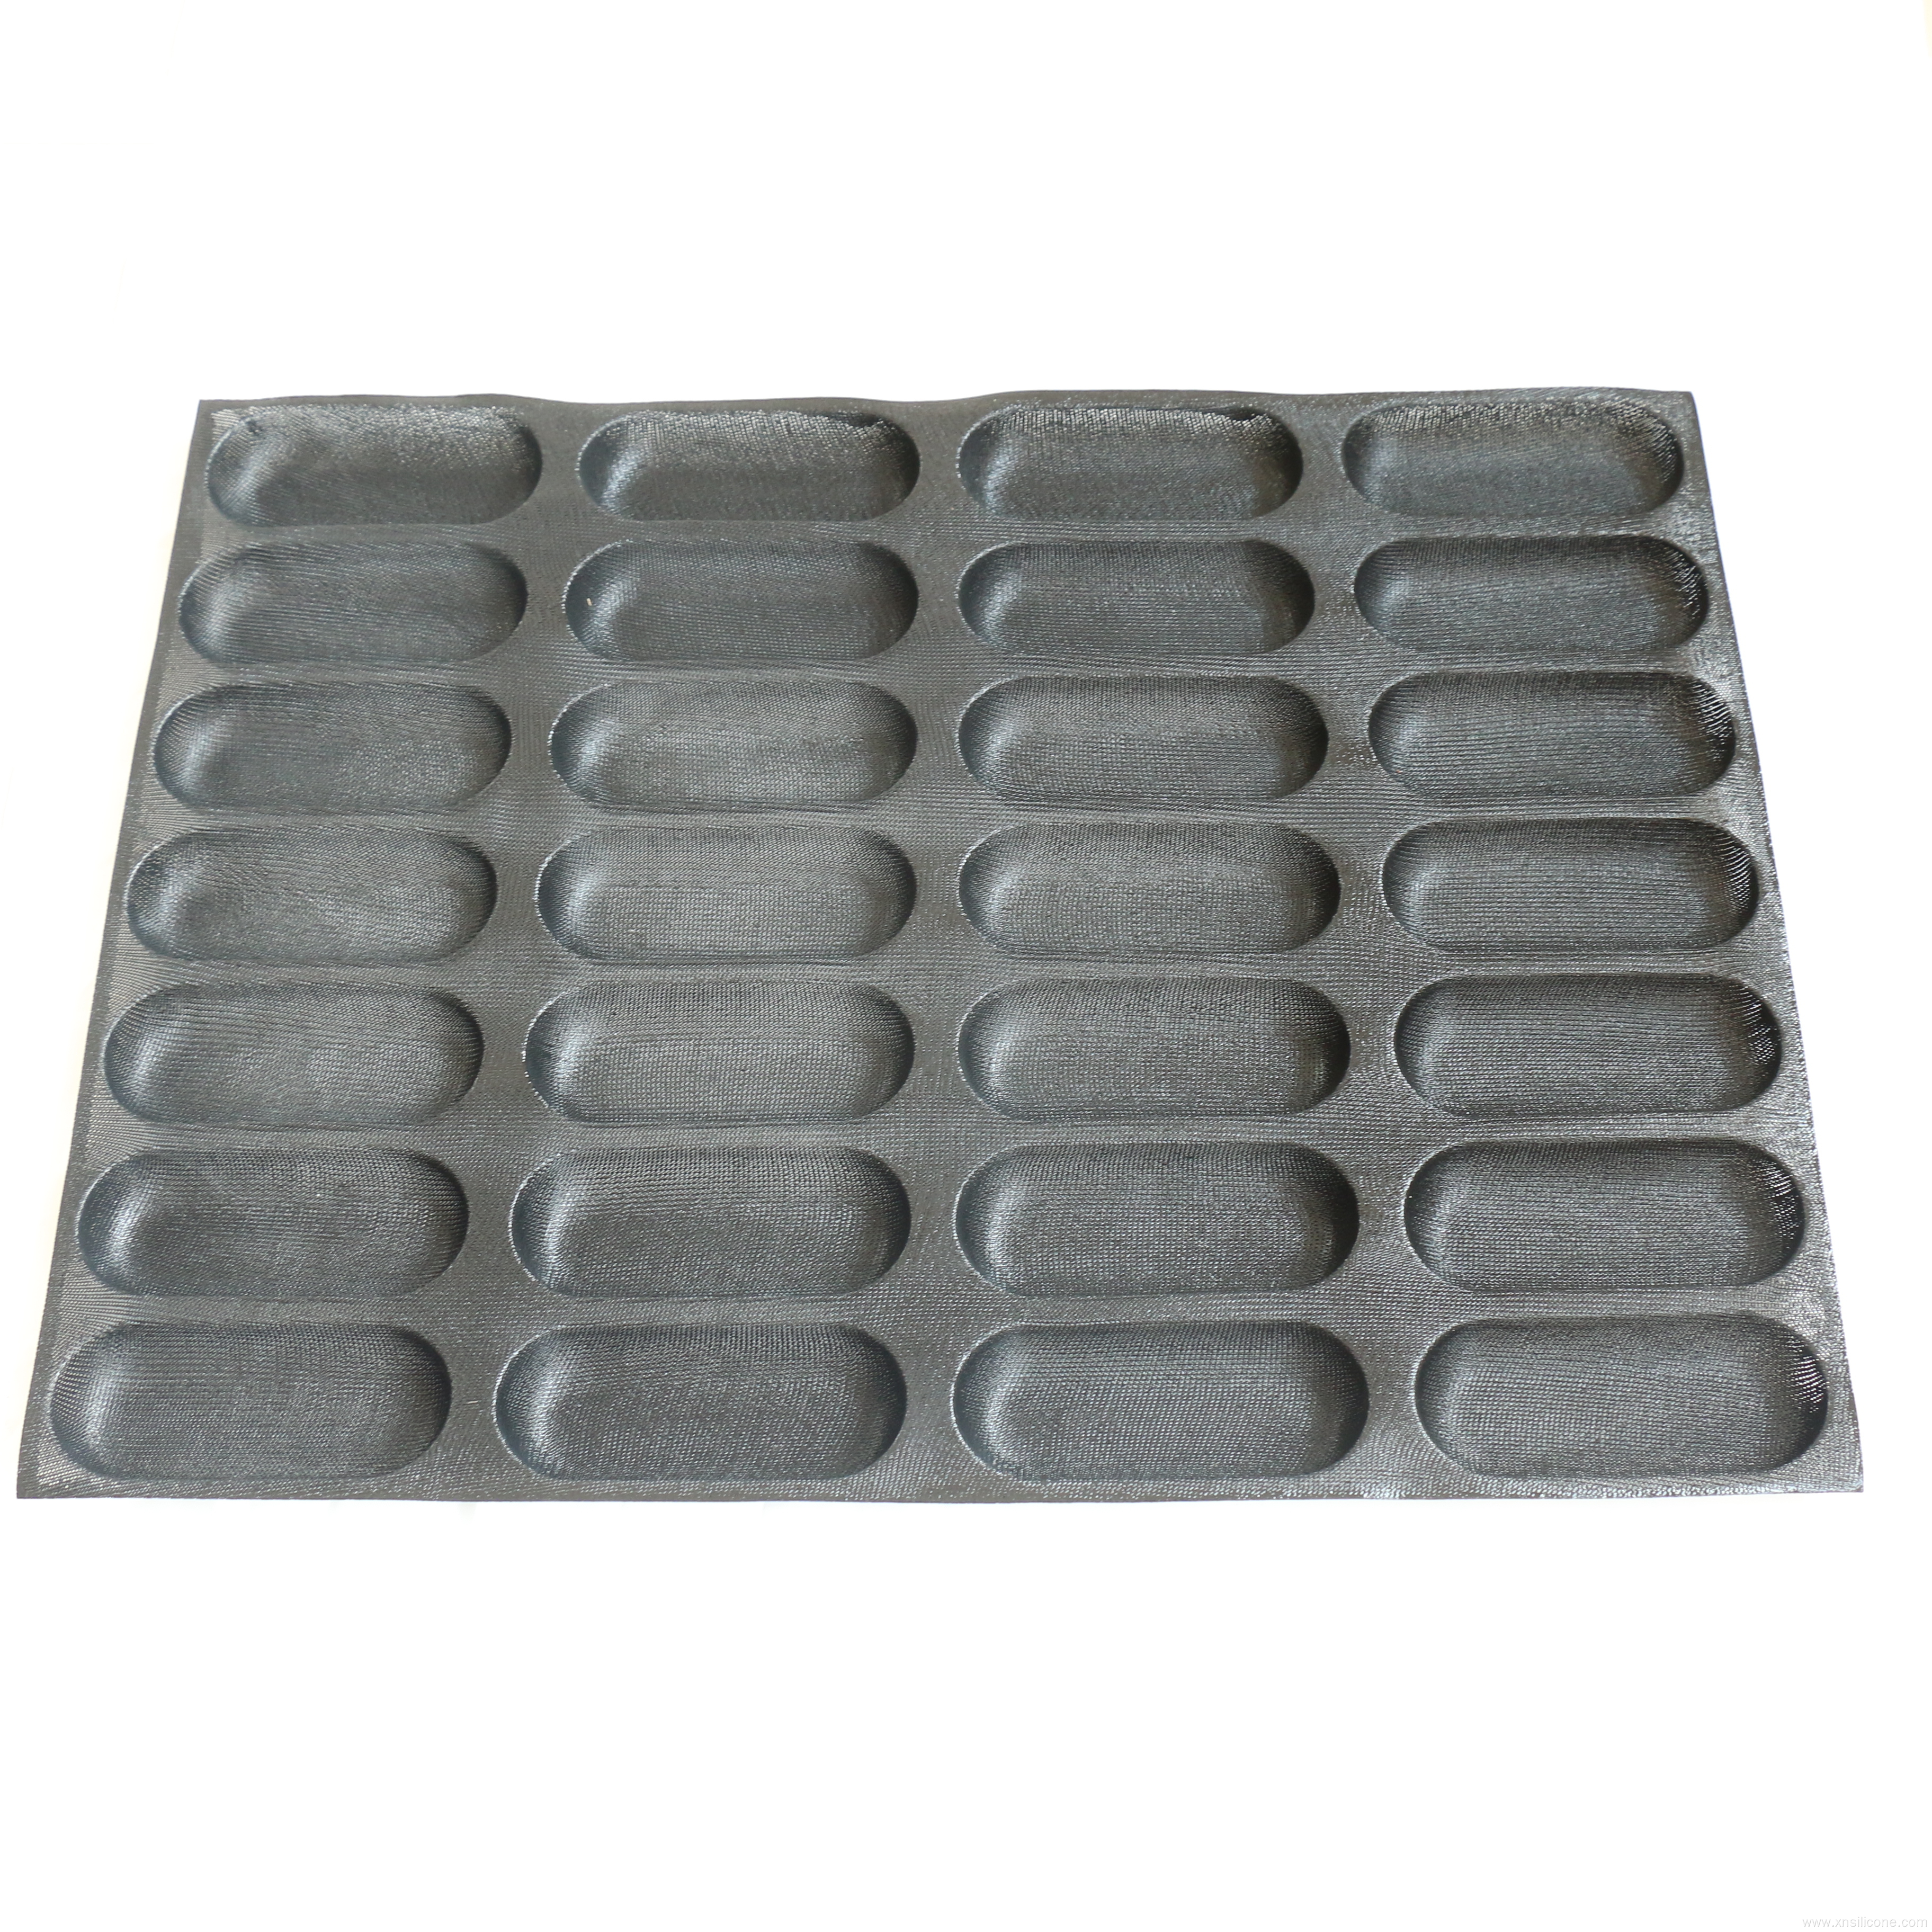 28 Cups Fiberglass Perforated Silicone Bread Form Moulds